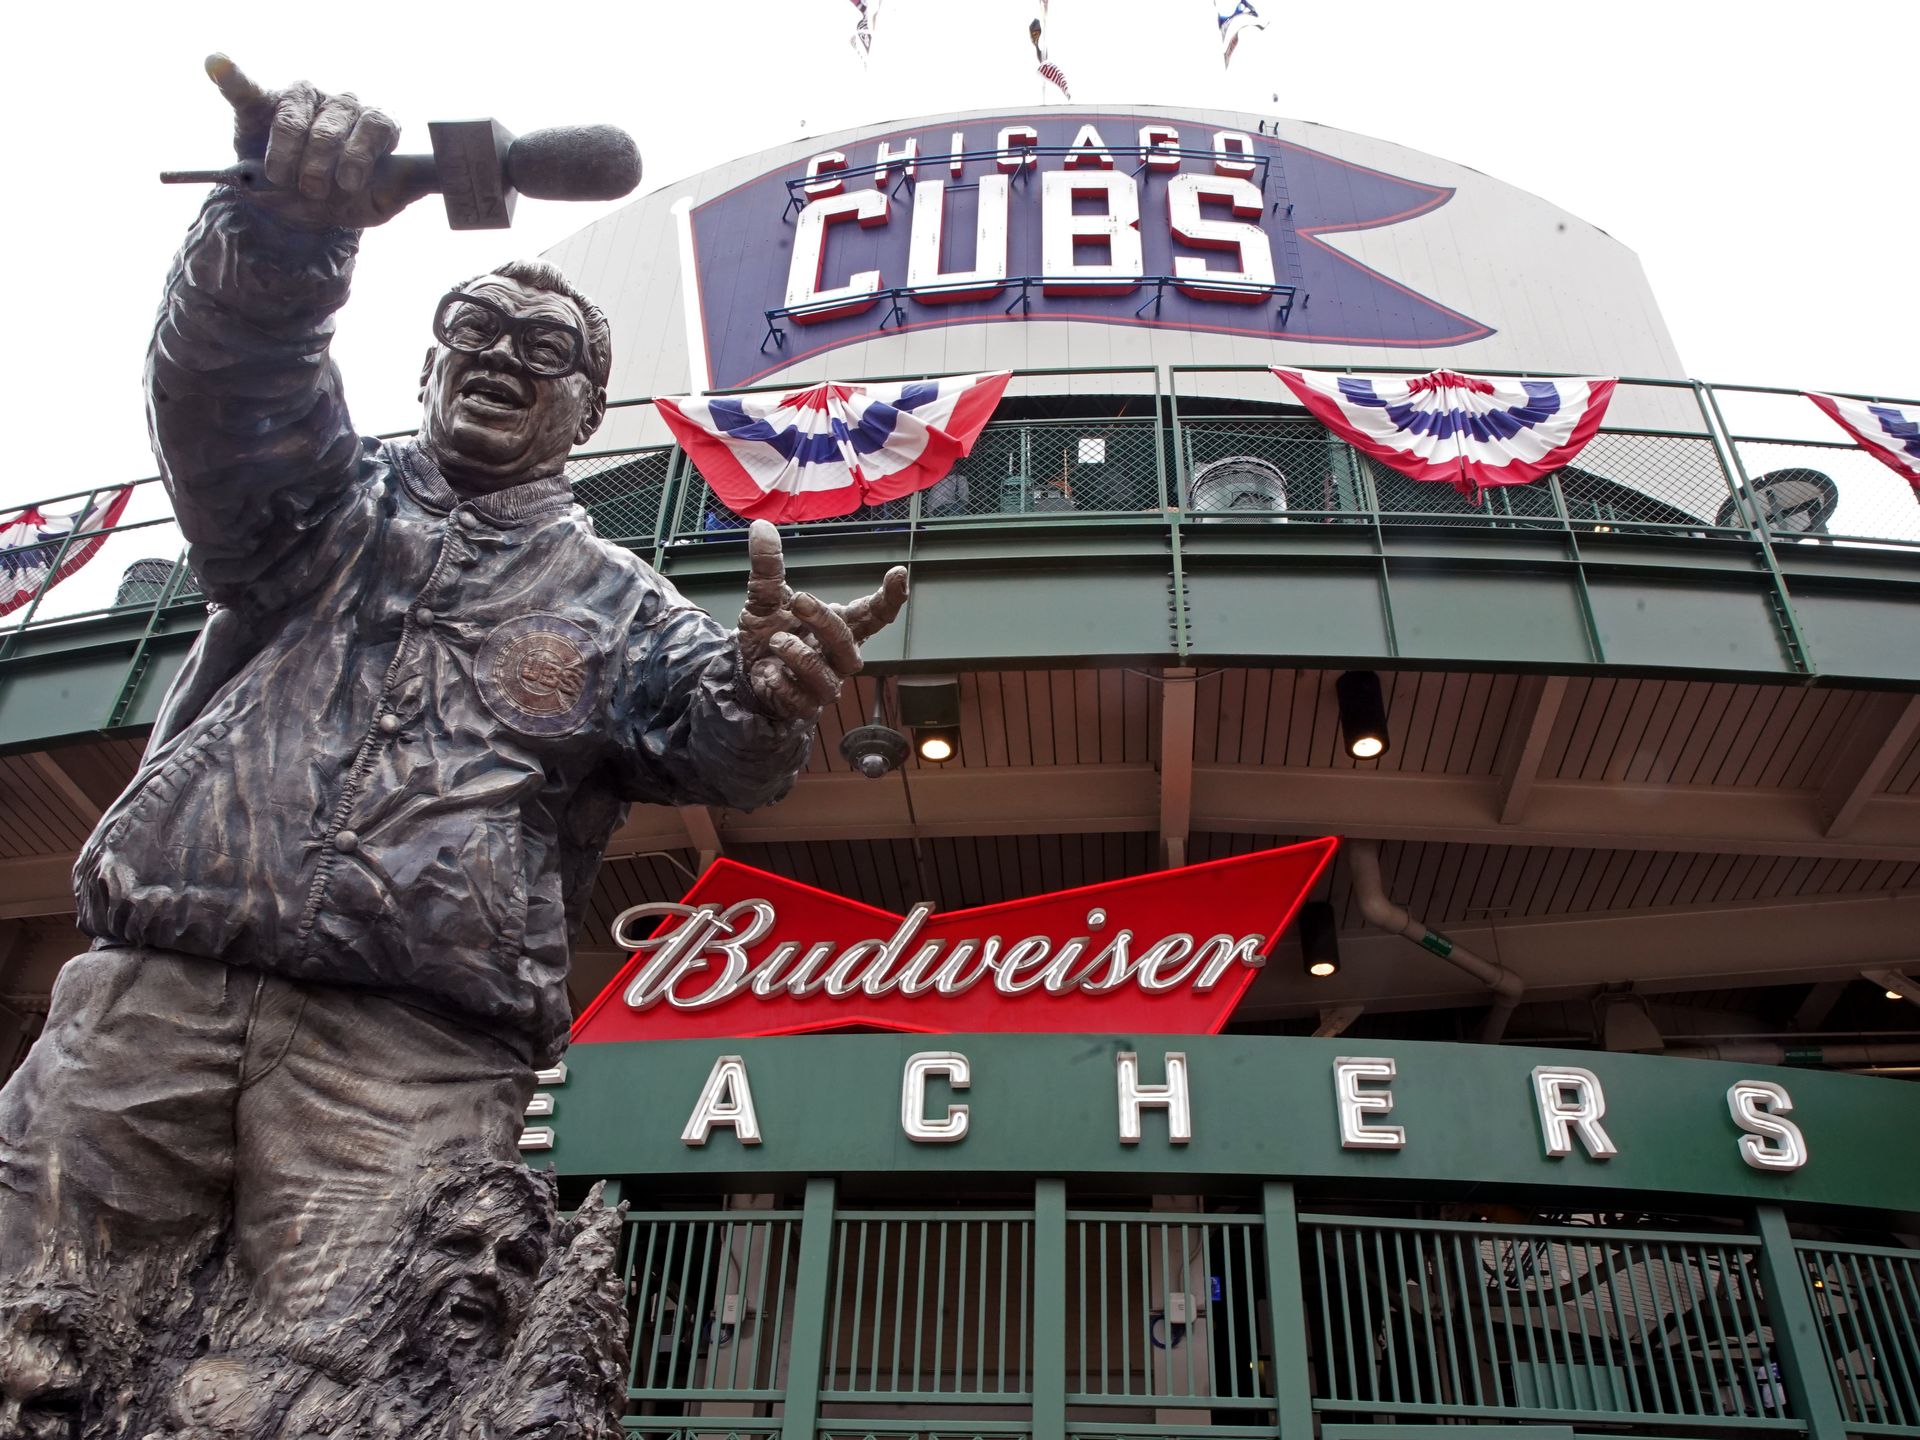 Cubs statues at Wrigley Field